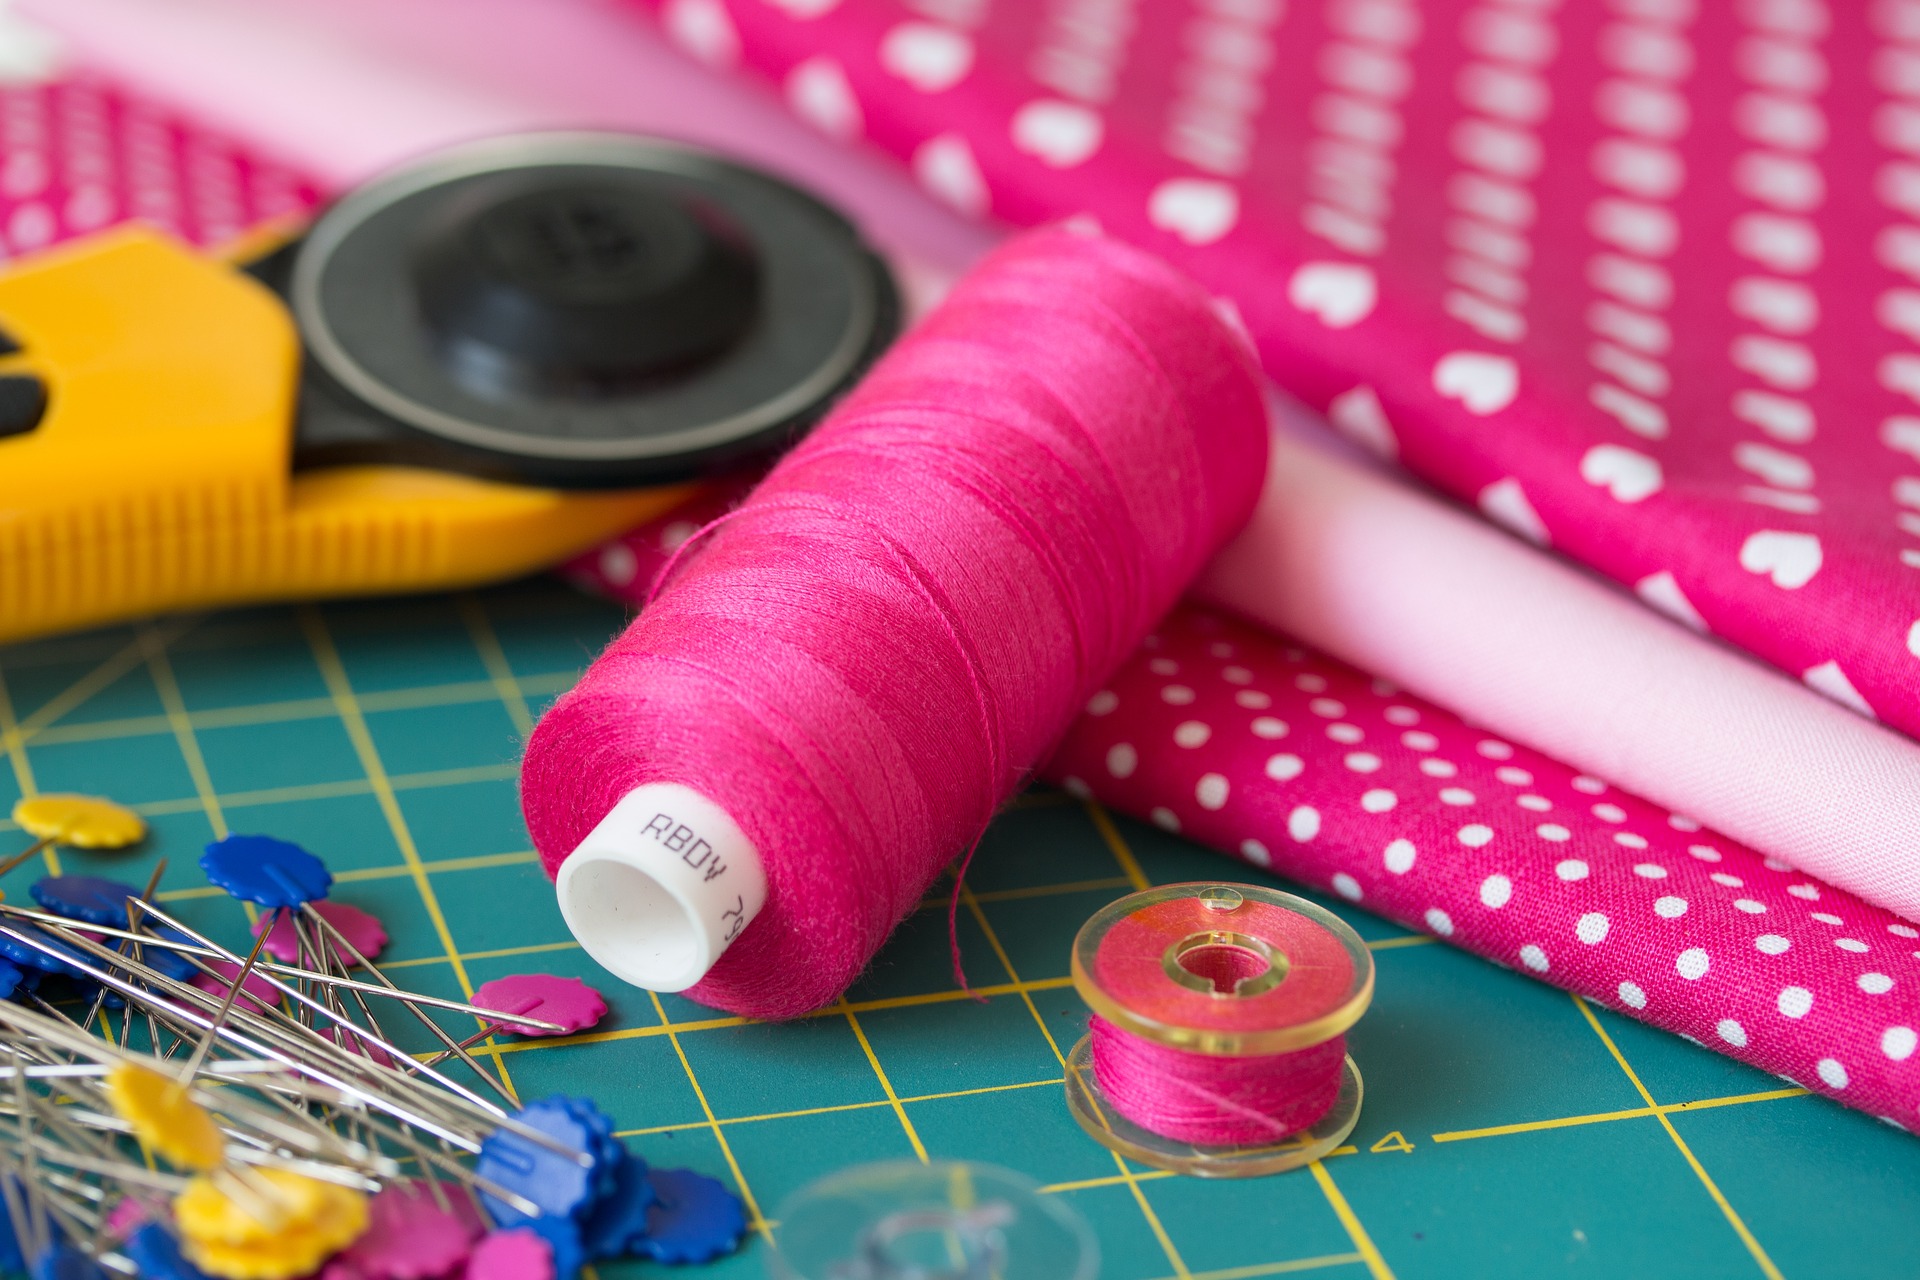 Fabric, thread and bobbins for sewing